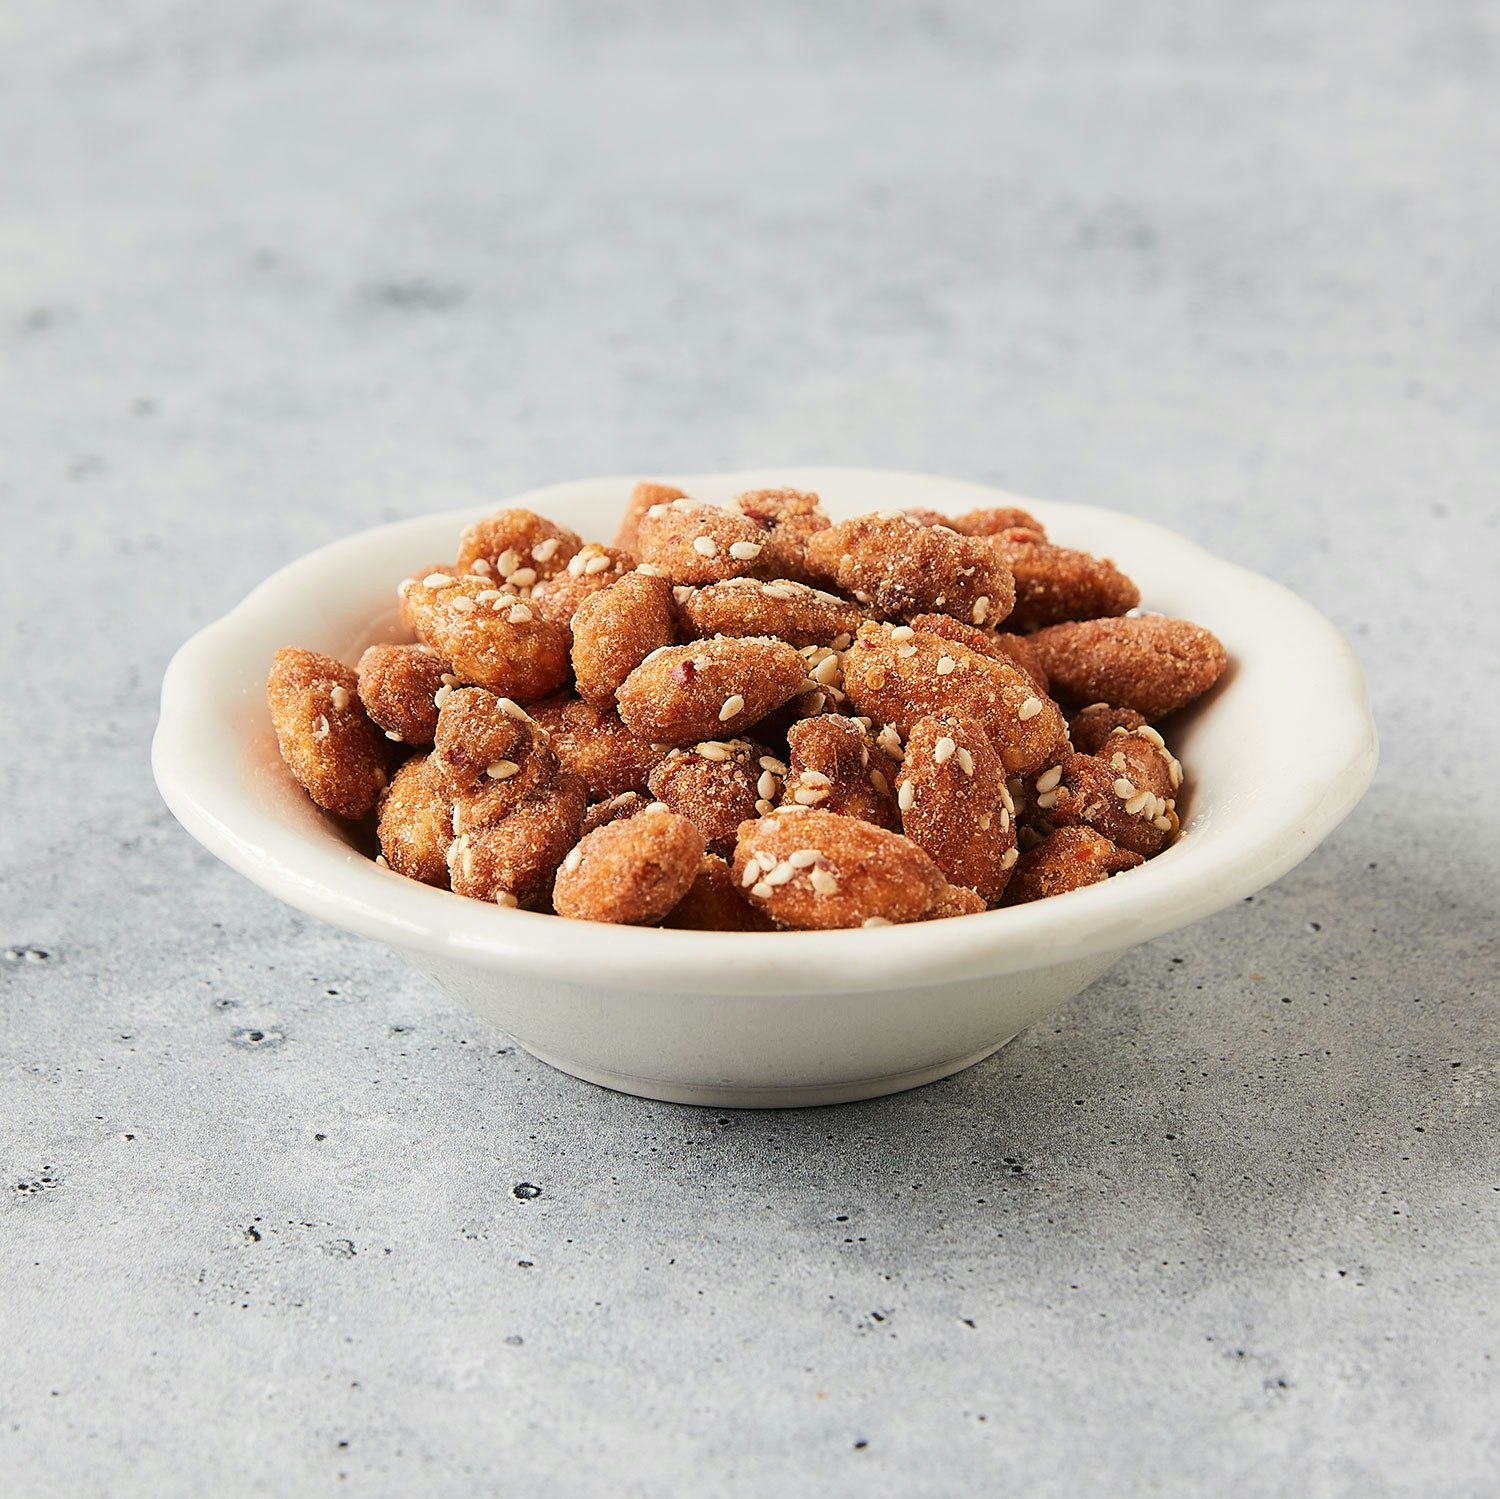 Treat Spiced Almonds specialty foods